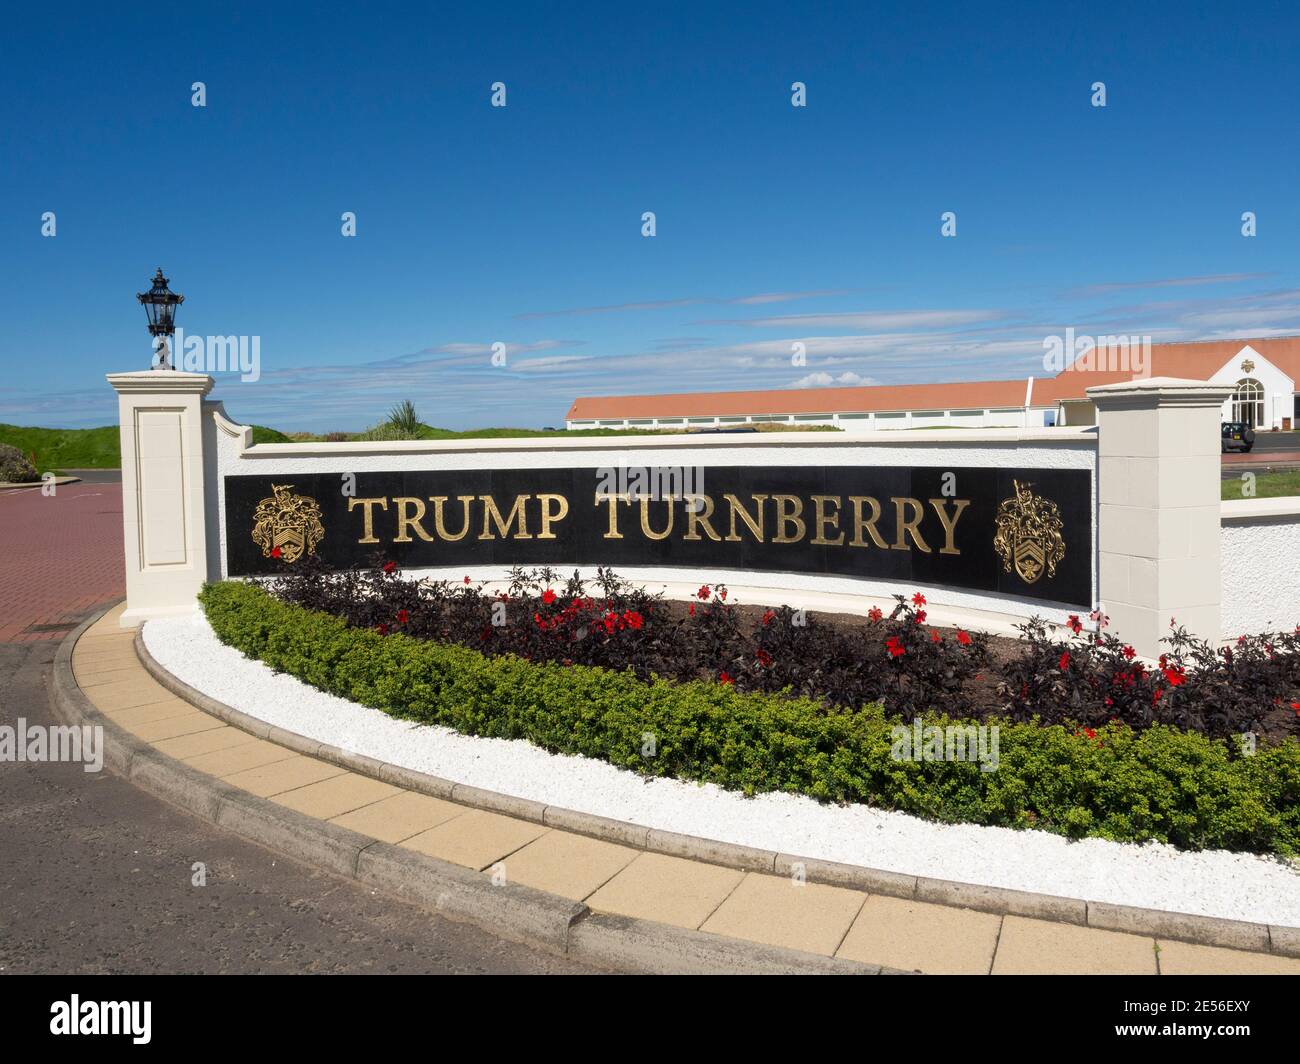 The Trump Turnberry Golf Course in Ayrshire in Scotland. Stock Photo